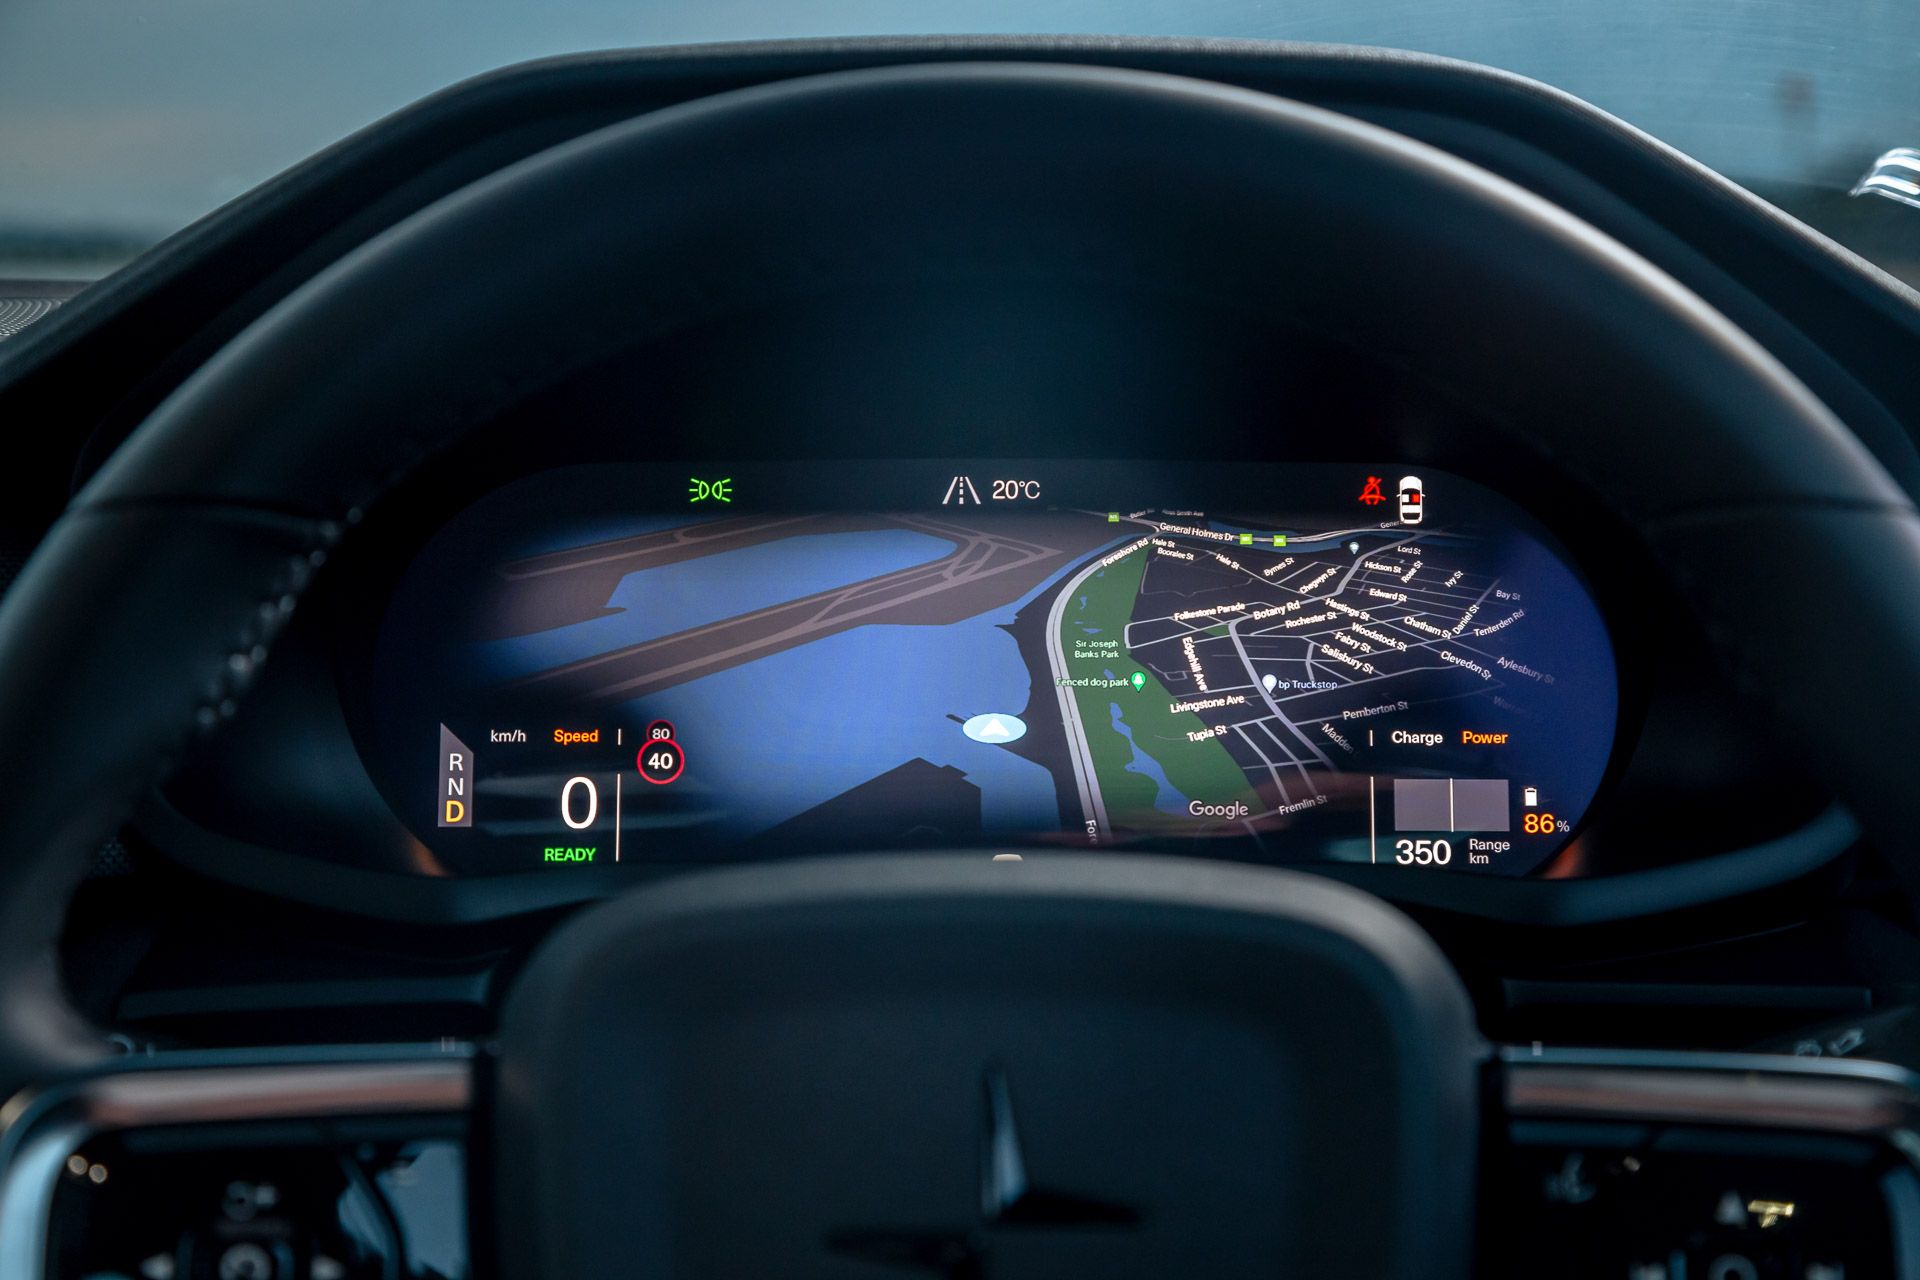 Polestar 2 touchscreen and instrument cluster